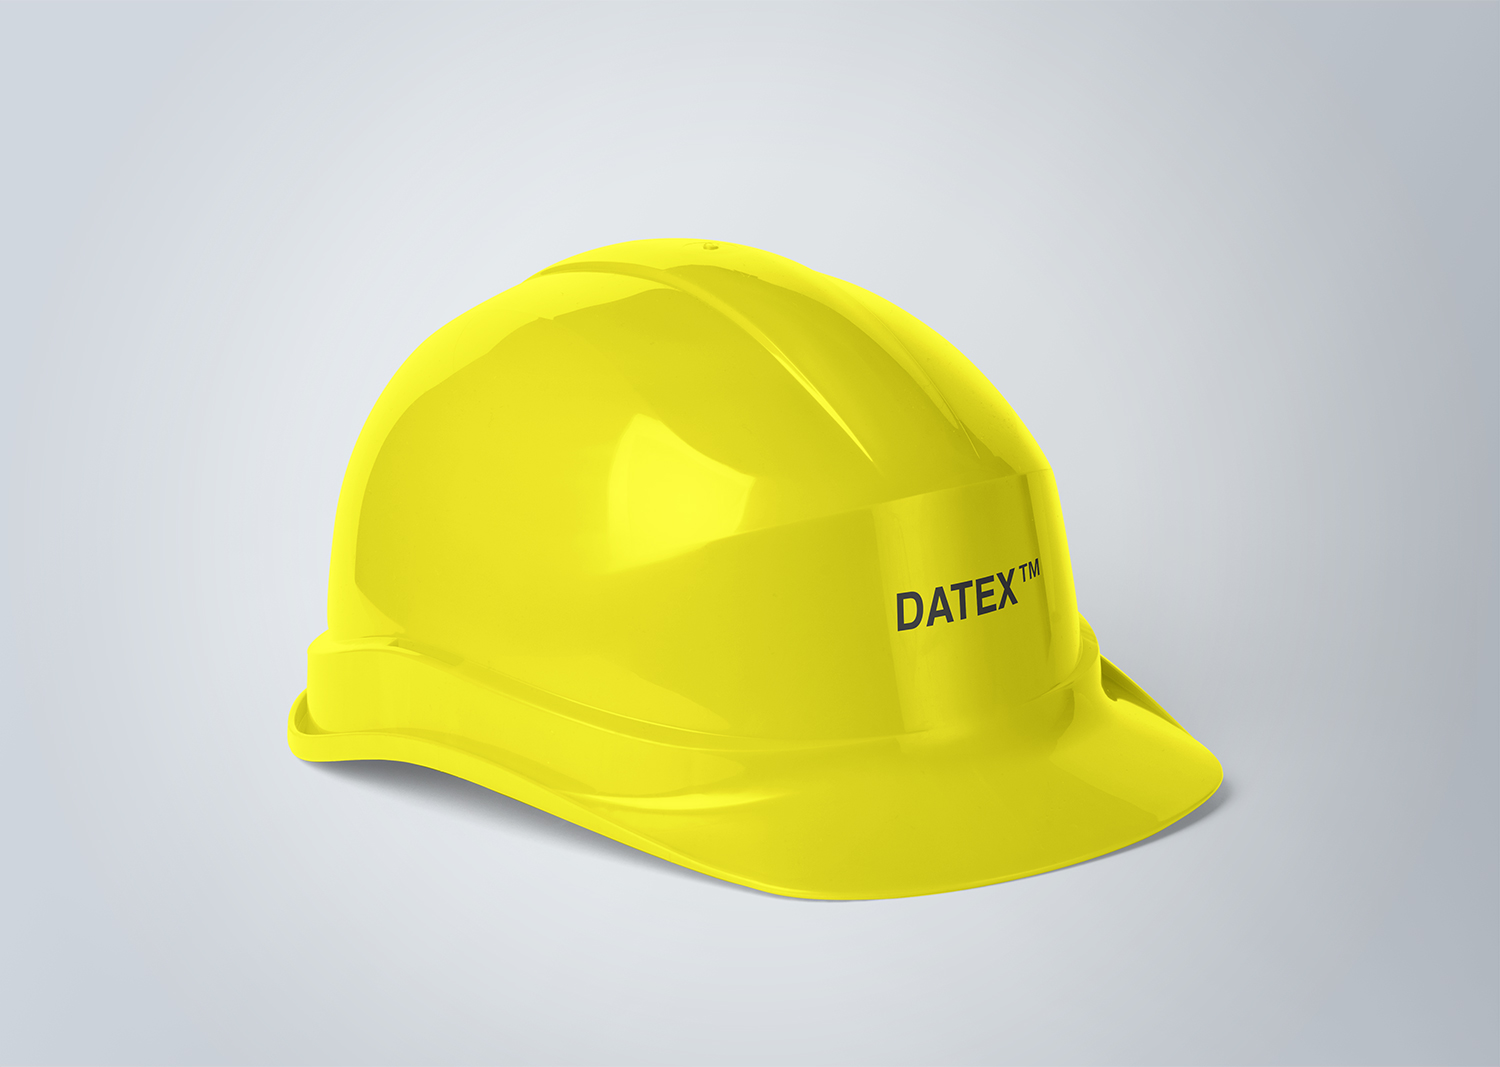 Download 26+ Construction Helmet Mockup Free Download Gif Yellowimages - Free PSD Mockup Templates